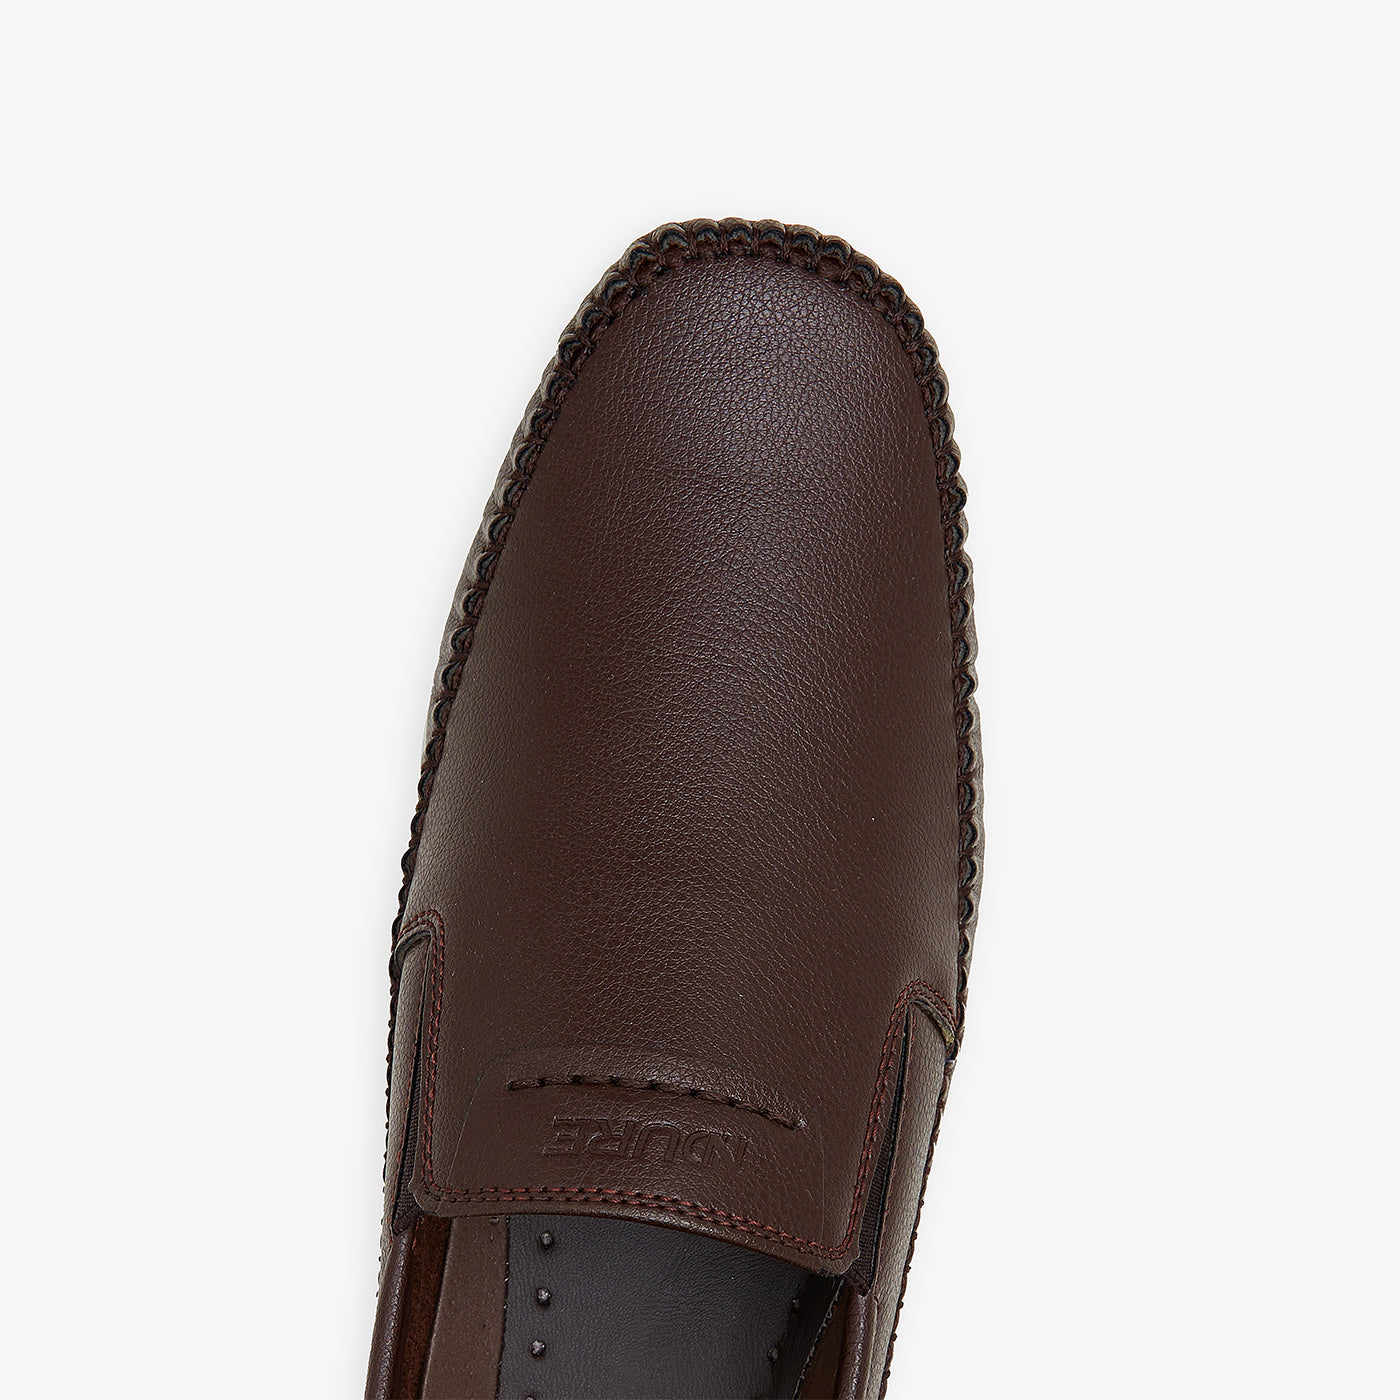 Men's Classic Everyday Loafers